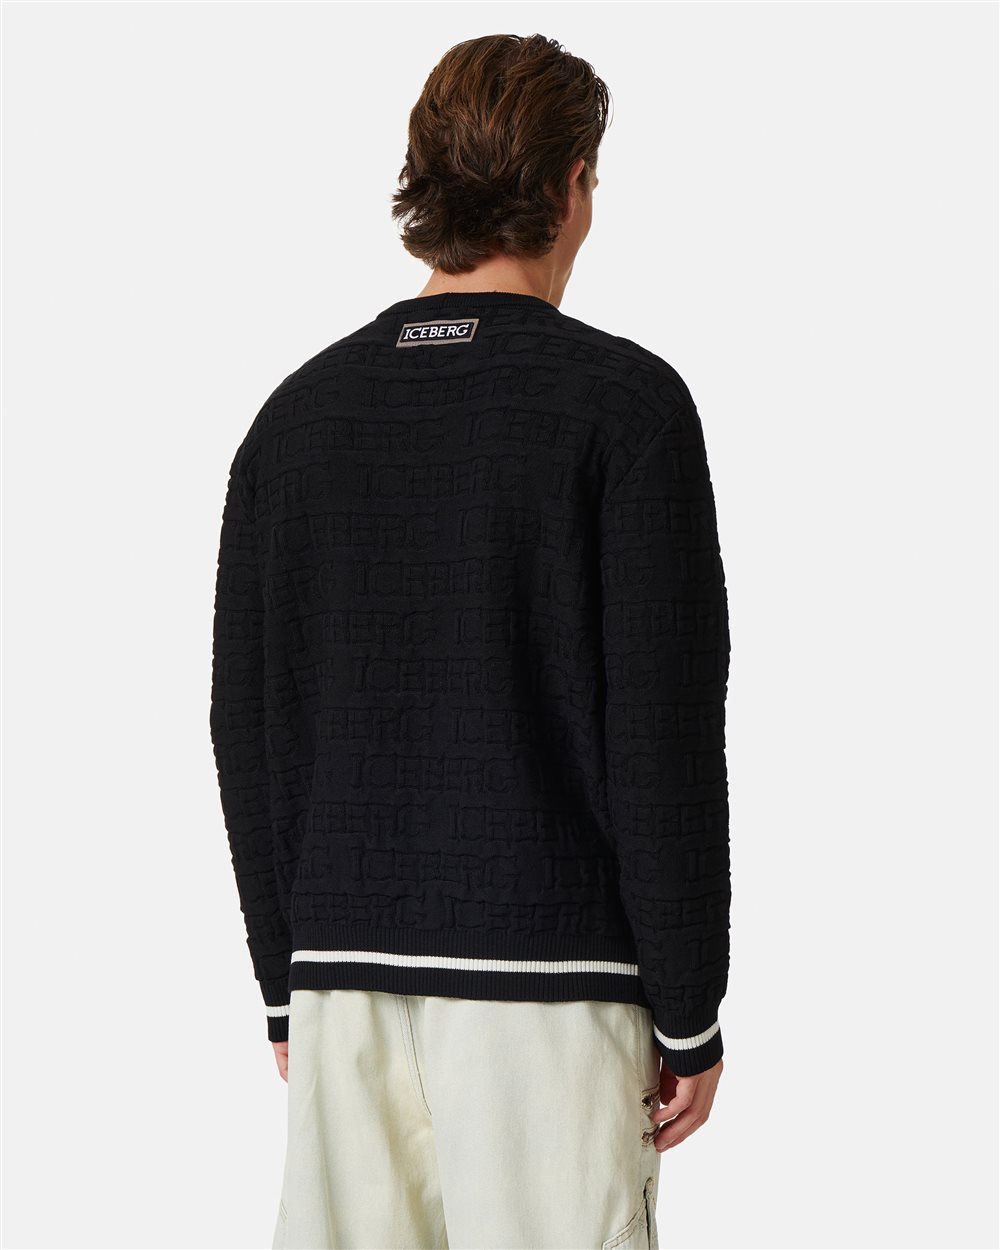 Black sweater with allover logo - Iceberg - Official Website